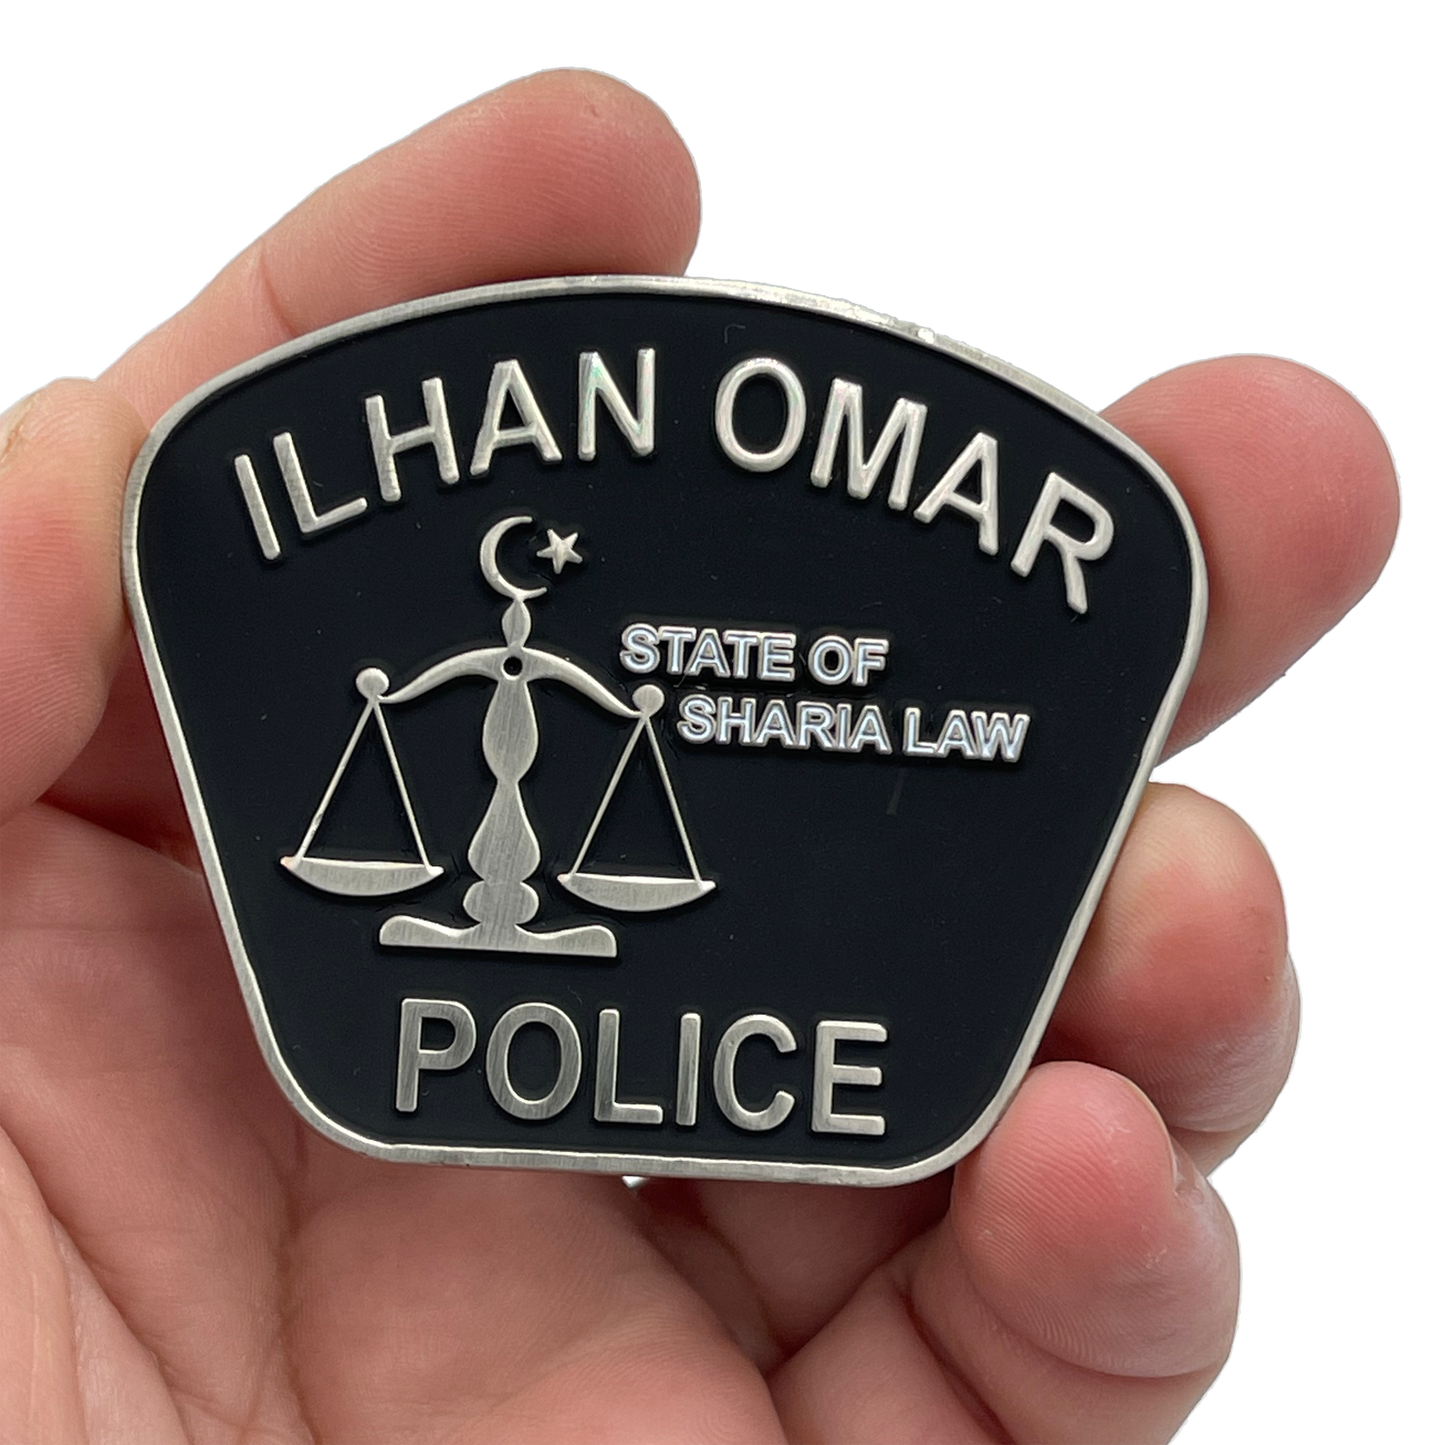 EL6-001 The Official Unofficial Governor Walz Minneapolis Police Department Congresswoman Ilhan Omar Sharia Law Challenge Coin